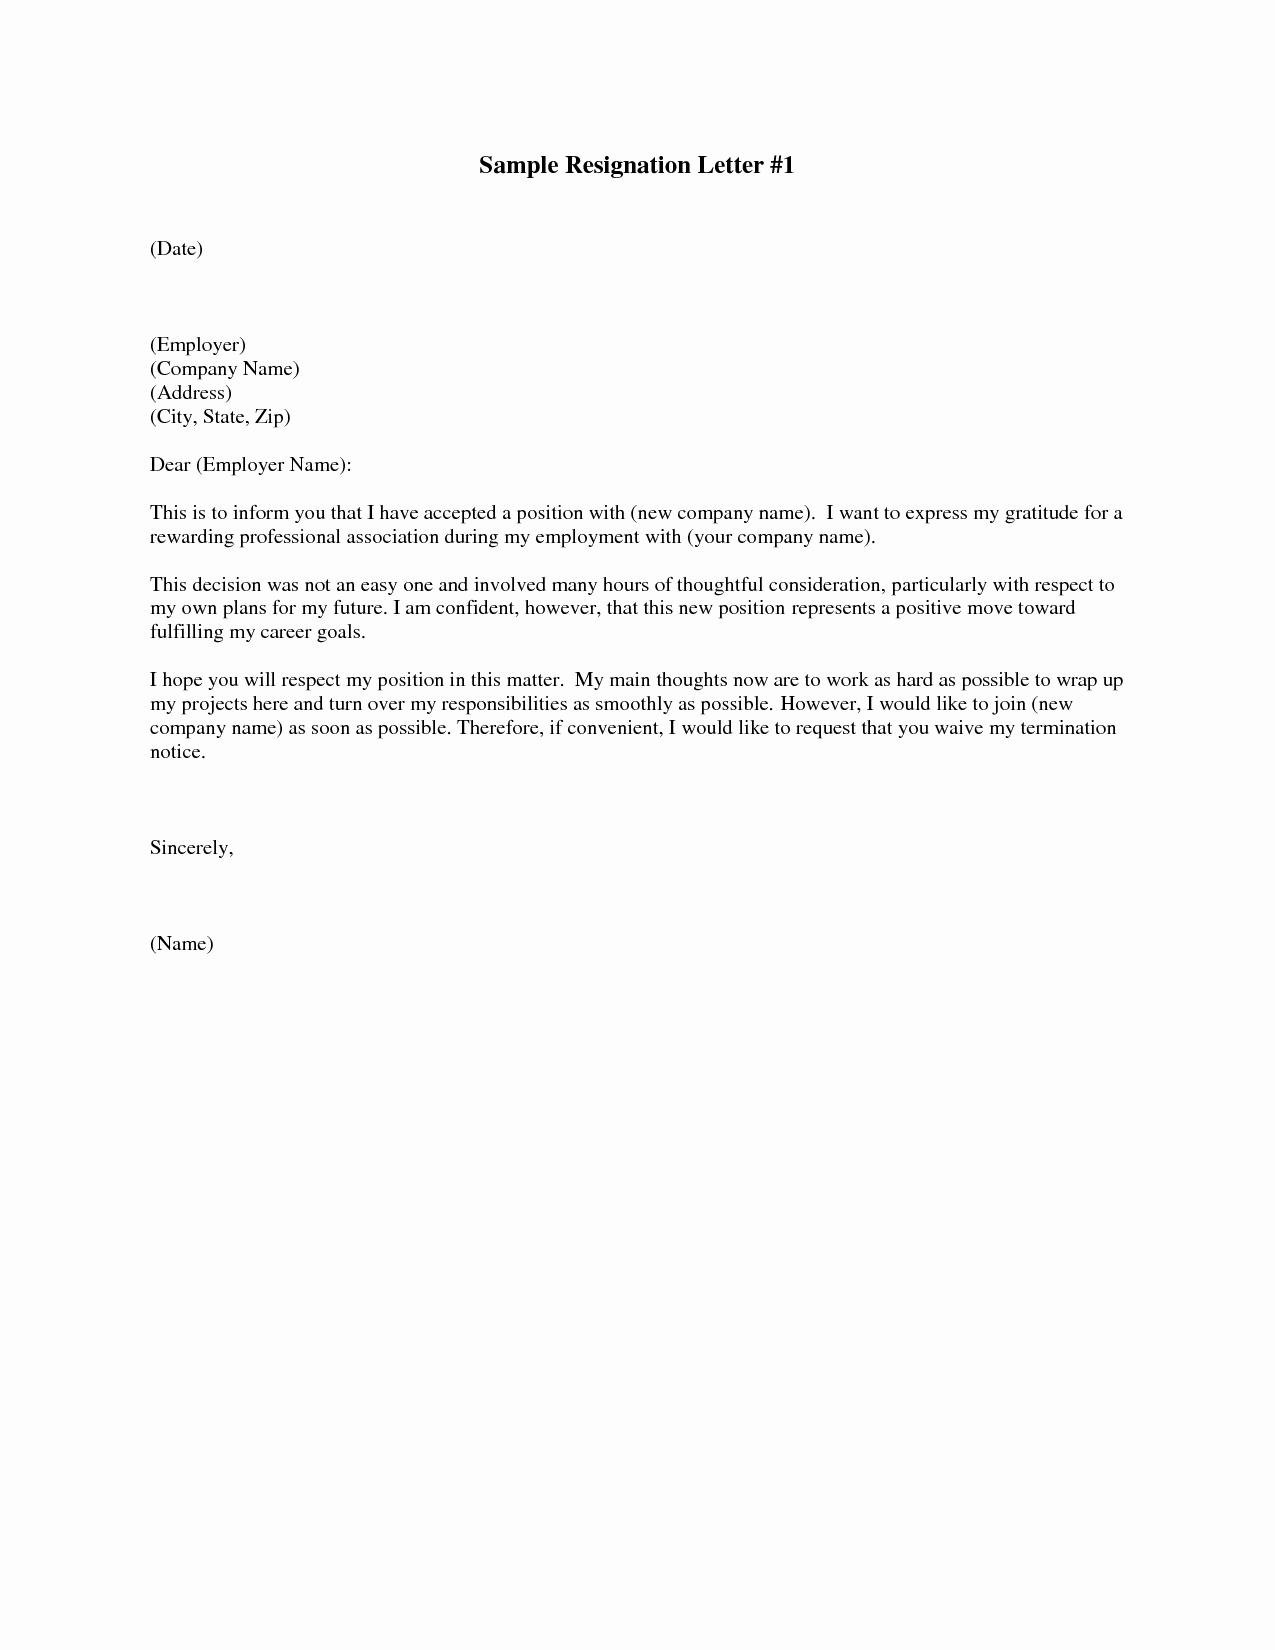 Resignation Letter Template Free Beautiful How to Write Easy Simple Resignation Letter Sample